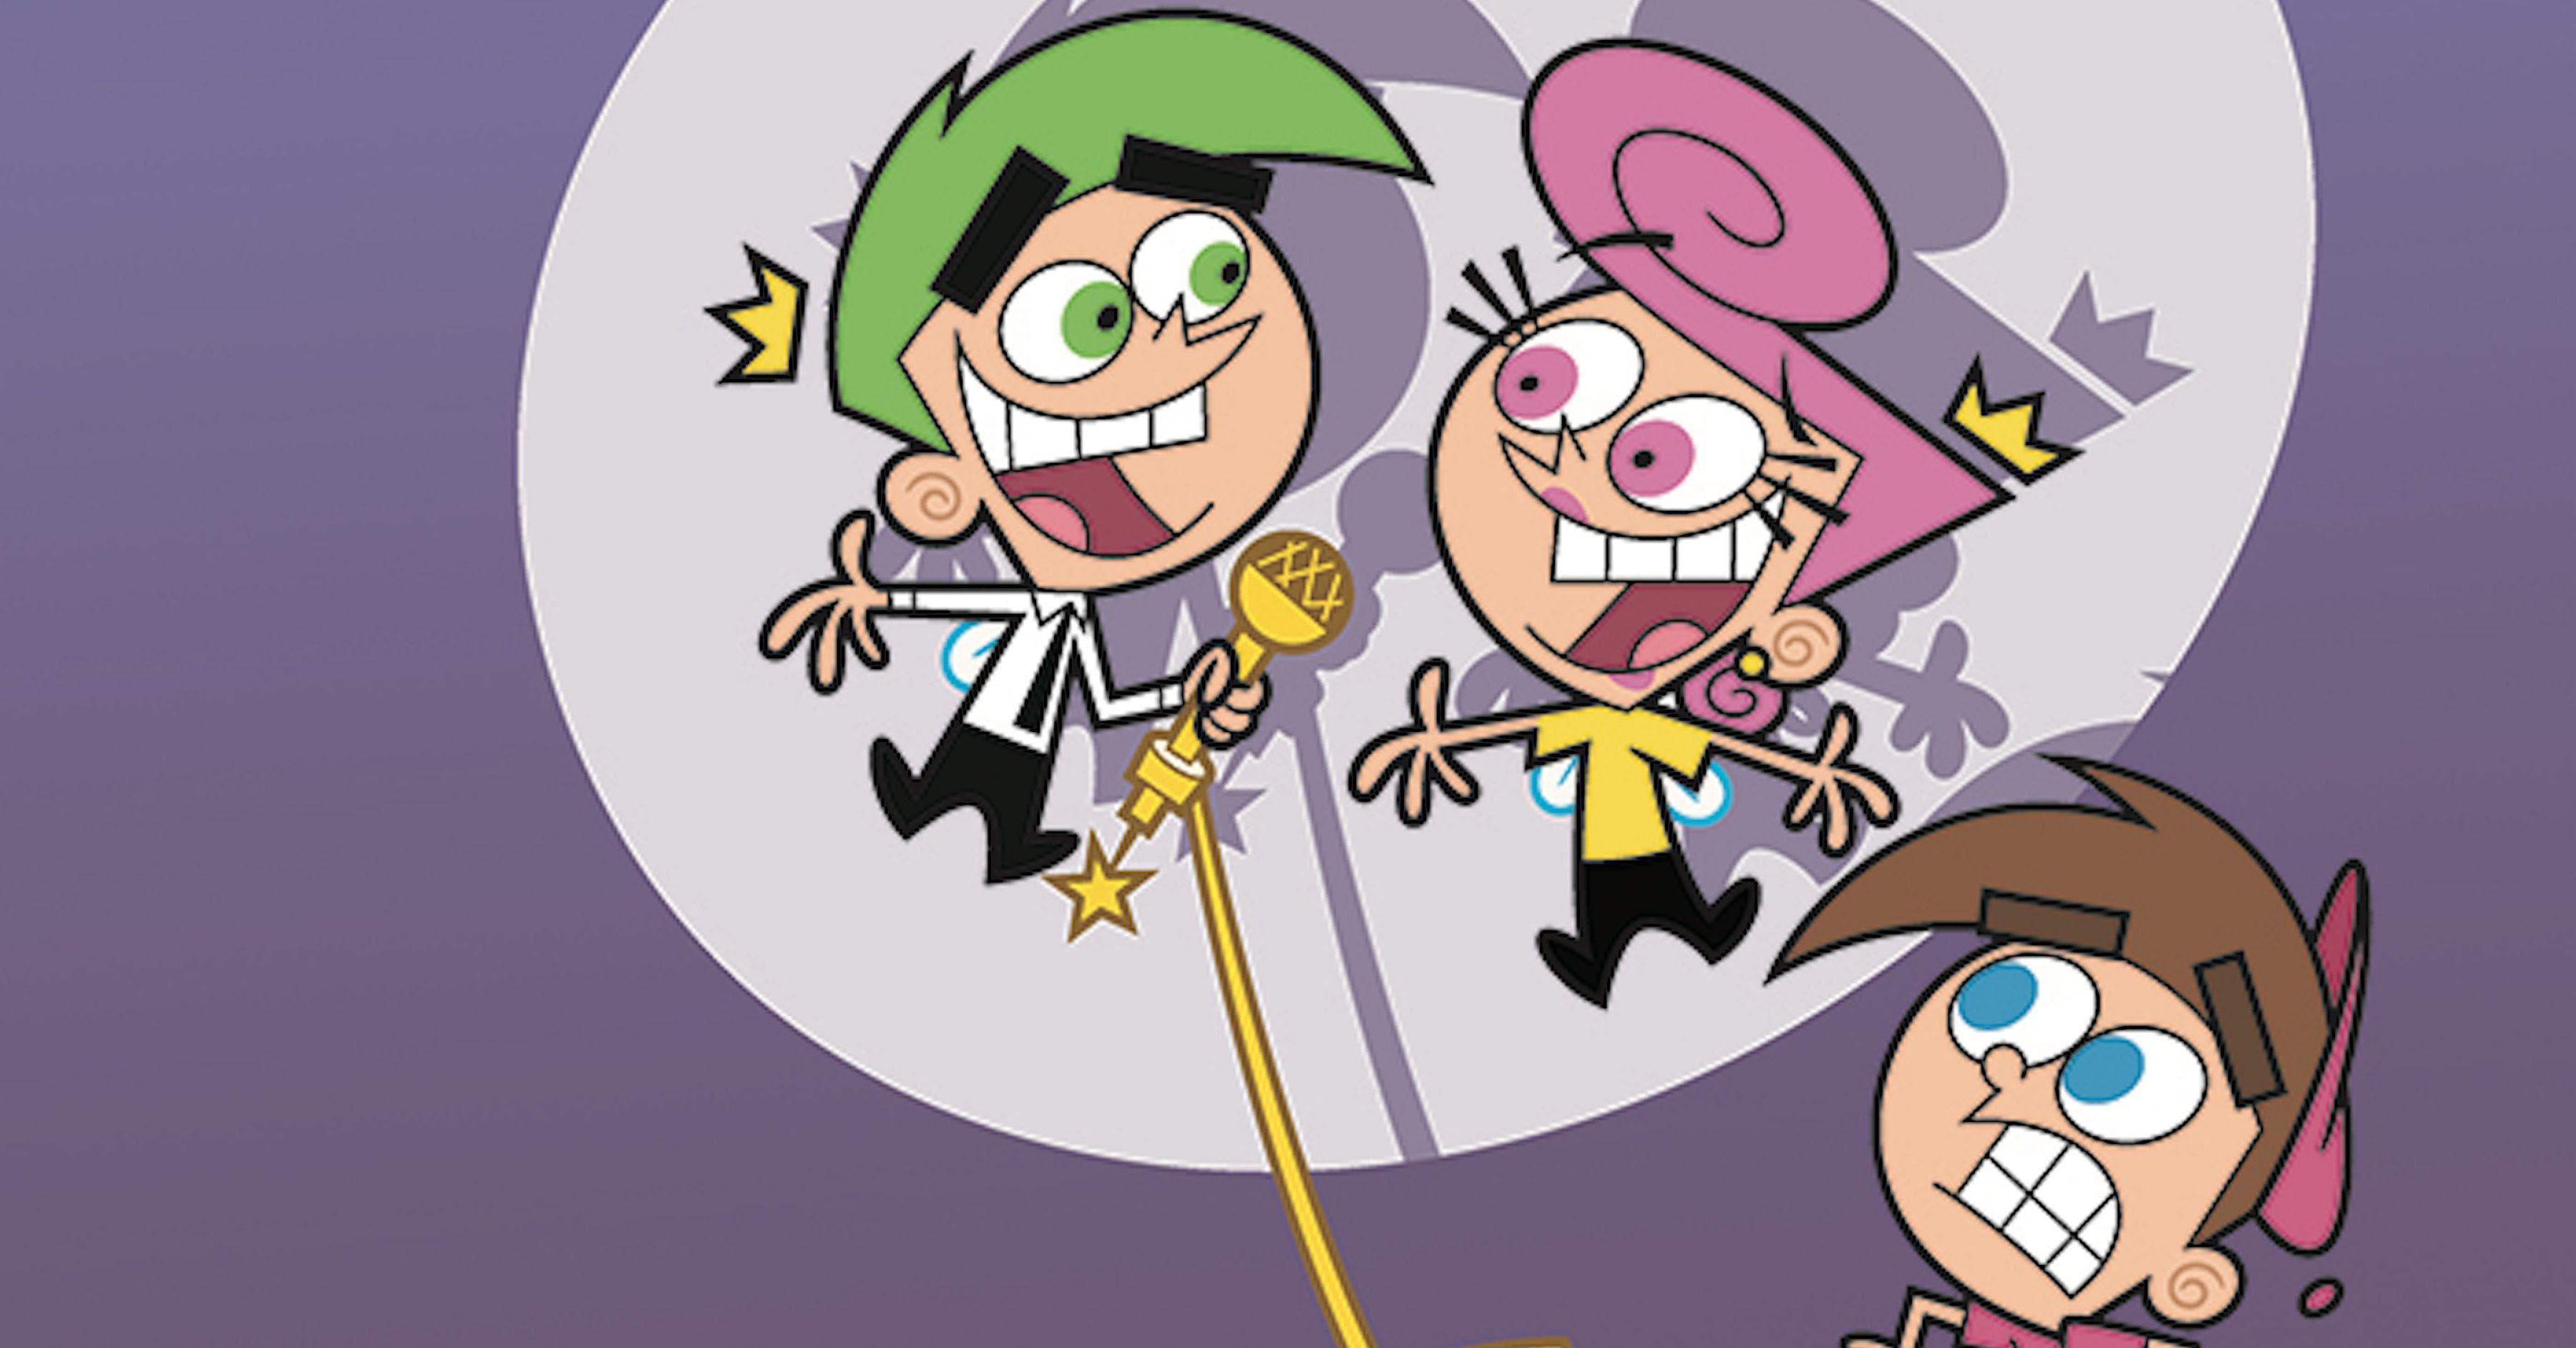 Jorgen And Wanda Fairly Oddparents Porn - The Fairly OddParents' Fan Theories That Make A Lot Of Sense